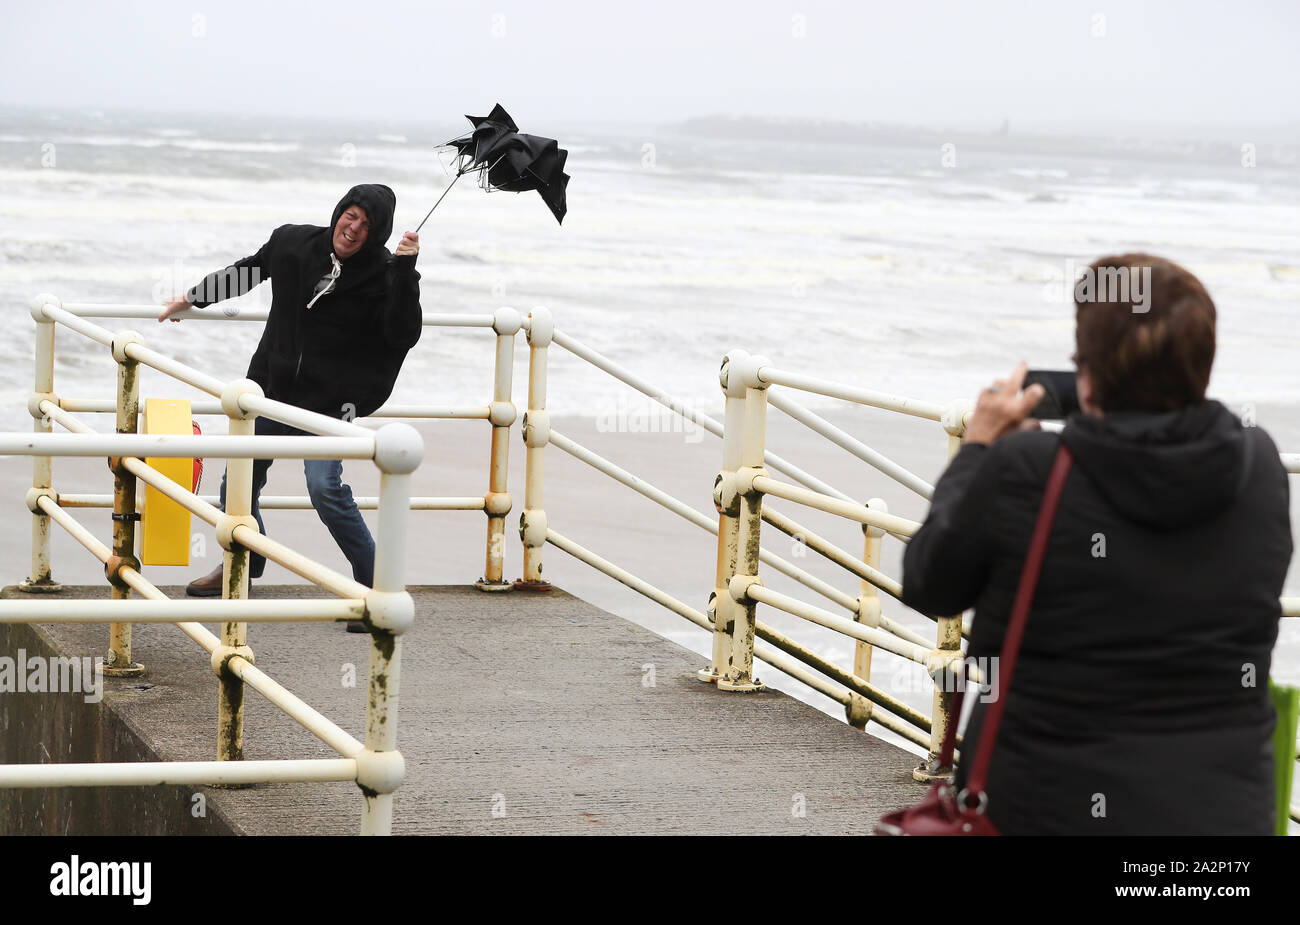 American tourists take photos with a broken umbrella along the sea front in Lahinch, County Clare, on the West Coast of Ireland as storm Lorenzo makes landfall, with a status orange wind warning and a yellow rain warning having been issued. Stock Photo